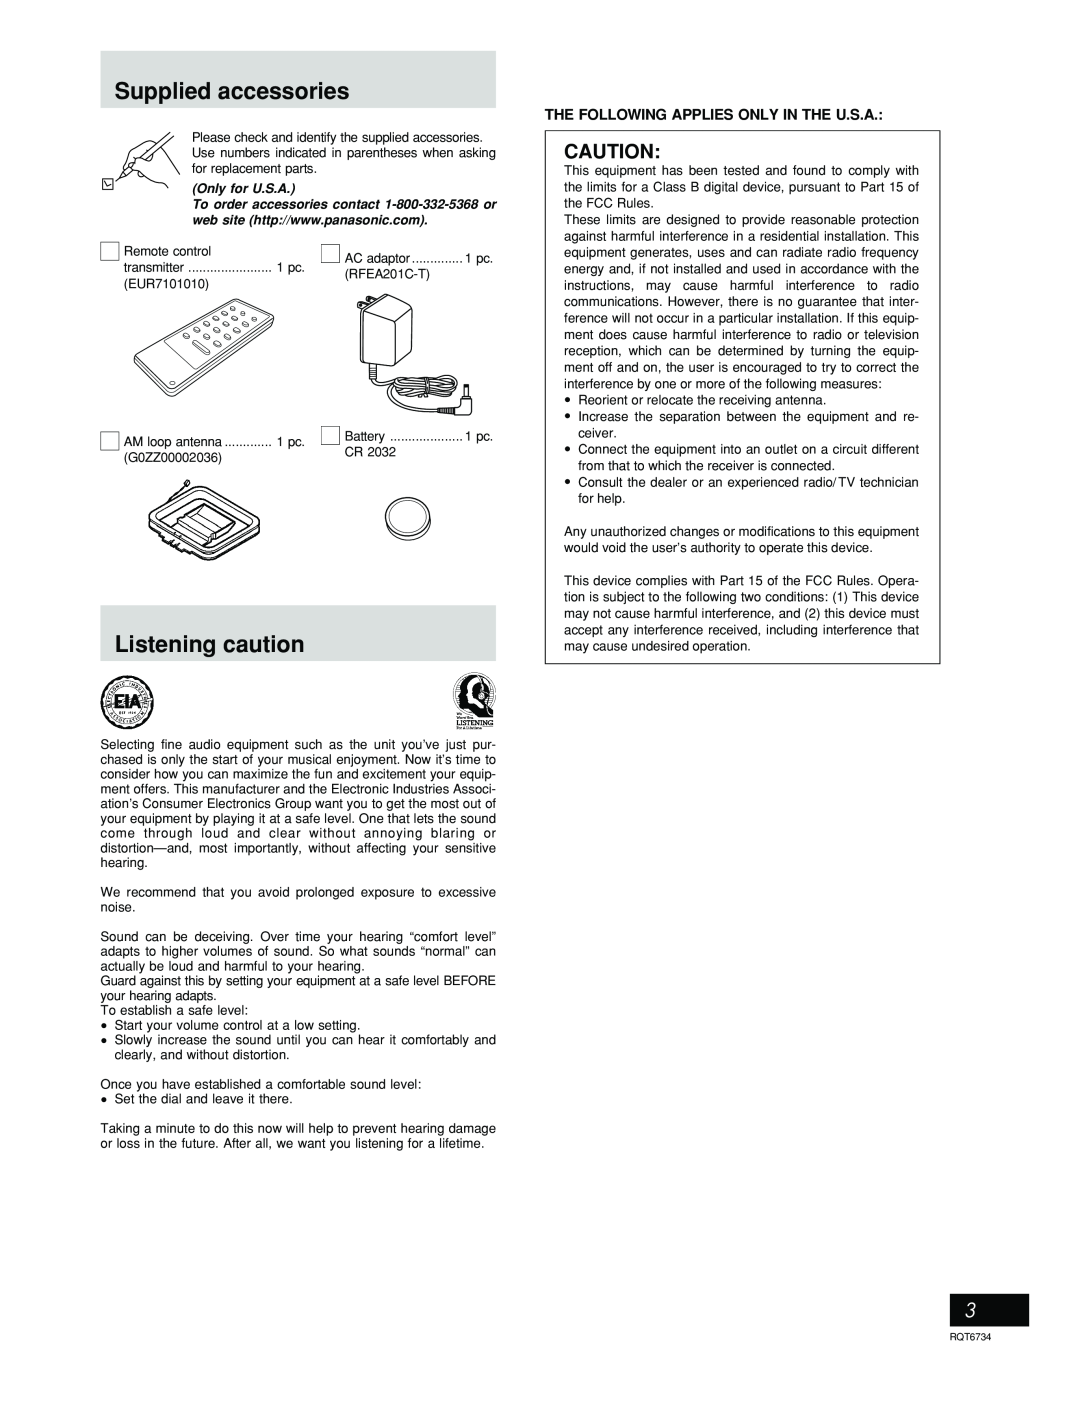 Panasonic SC-EN53 manual Supplied accessories, Listening caution, The Following Applies Only In The U.S.A 